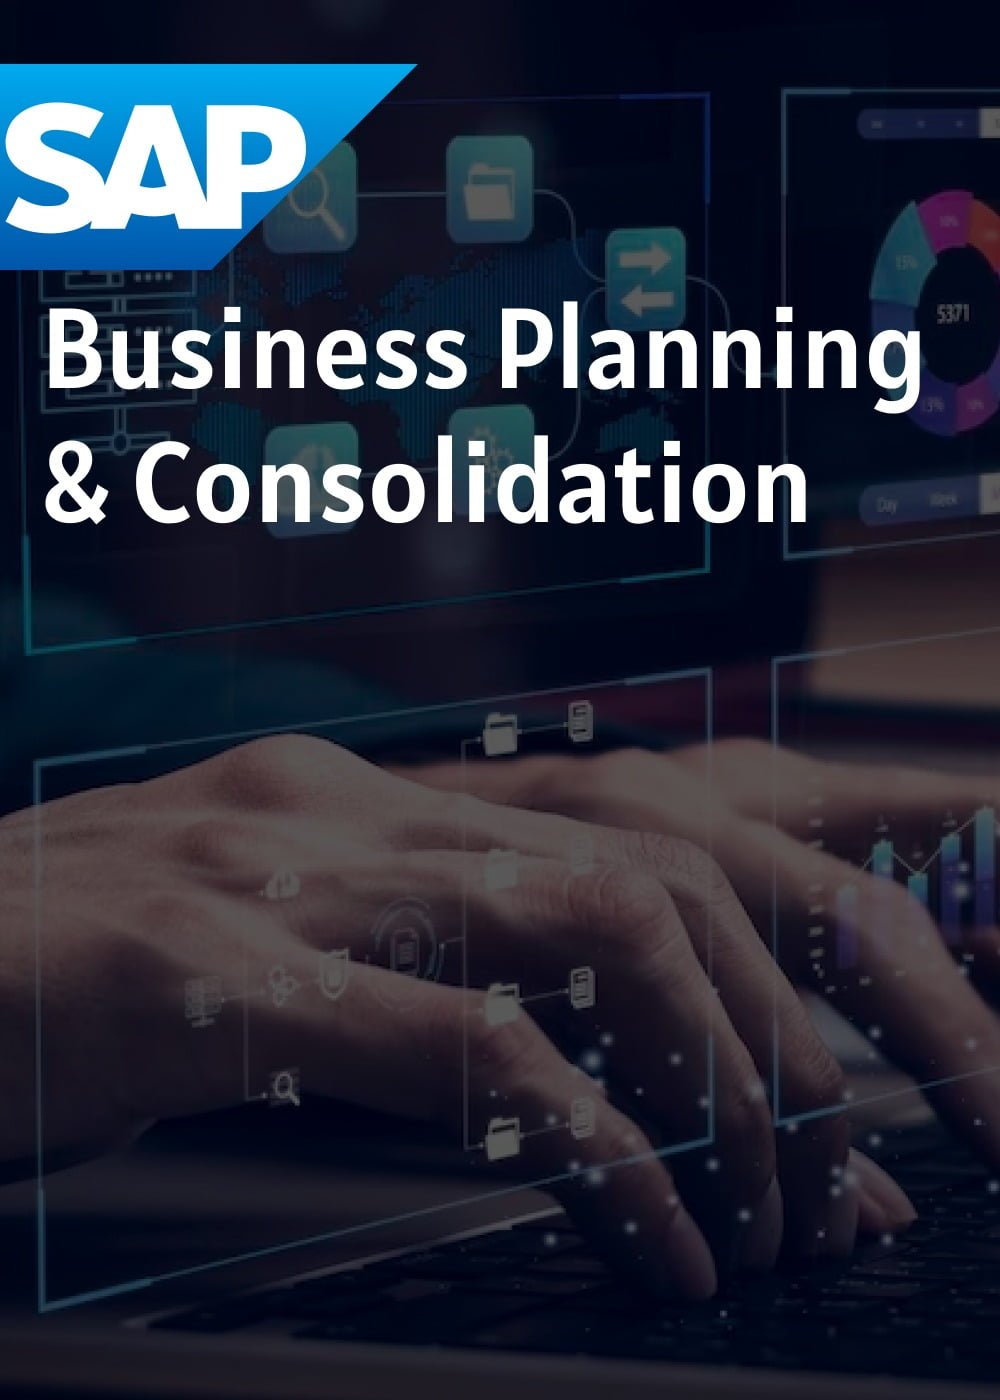 Efficiently manage your financial planning and consolidation processes with SAP BPC. Our consultants specialize in configuring, implementing, and optimizing SAP BPC solutions tailored to your business requirements. Enjoy the potential of strategic financial management with our SAP BPC consulting expertise.